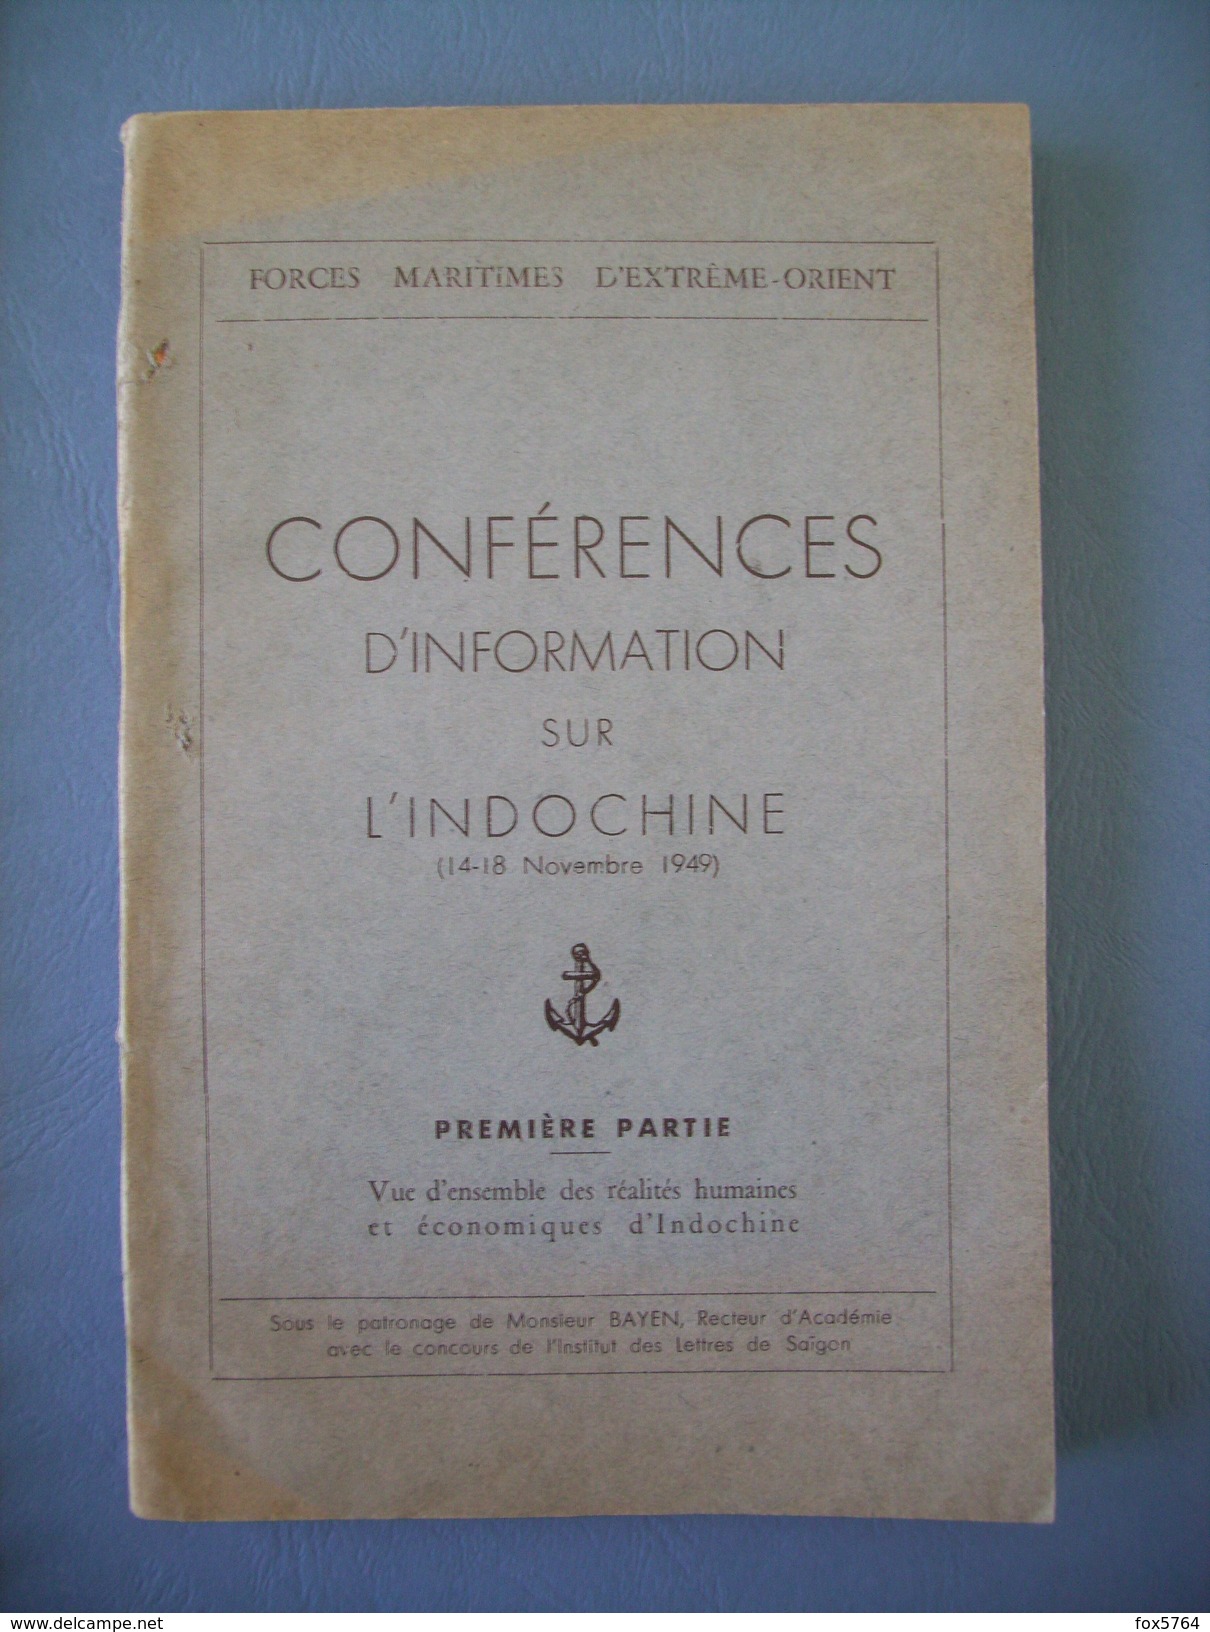 INDOCHINE / CONFERENCE INFORMATION / EXTREME-ORIENT / FMEO / édition ORIGINALE 1949 / 1 - Documents